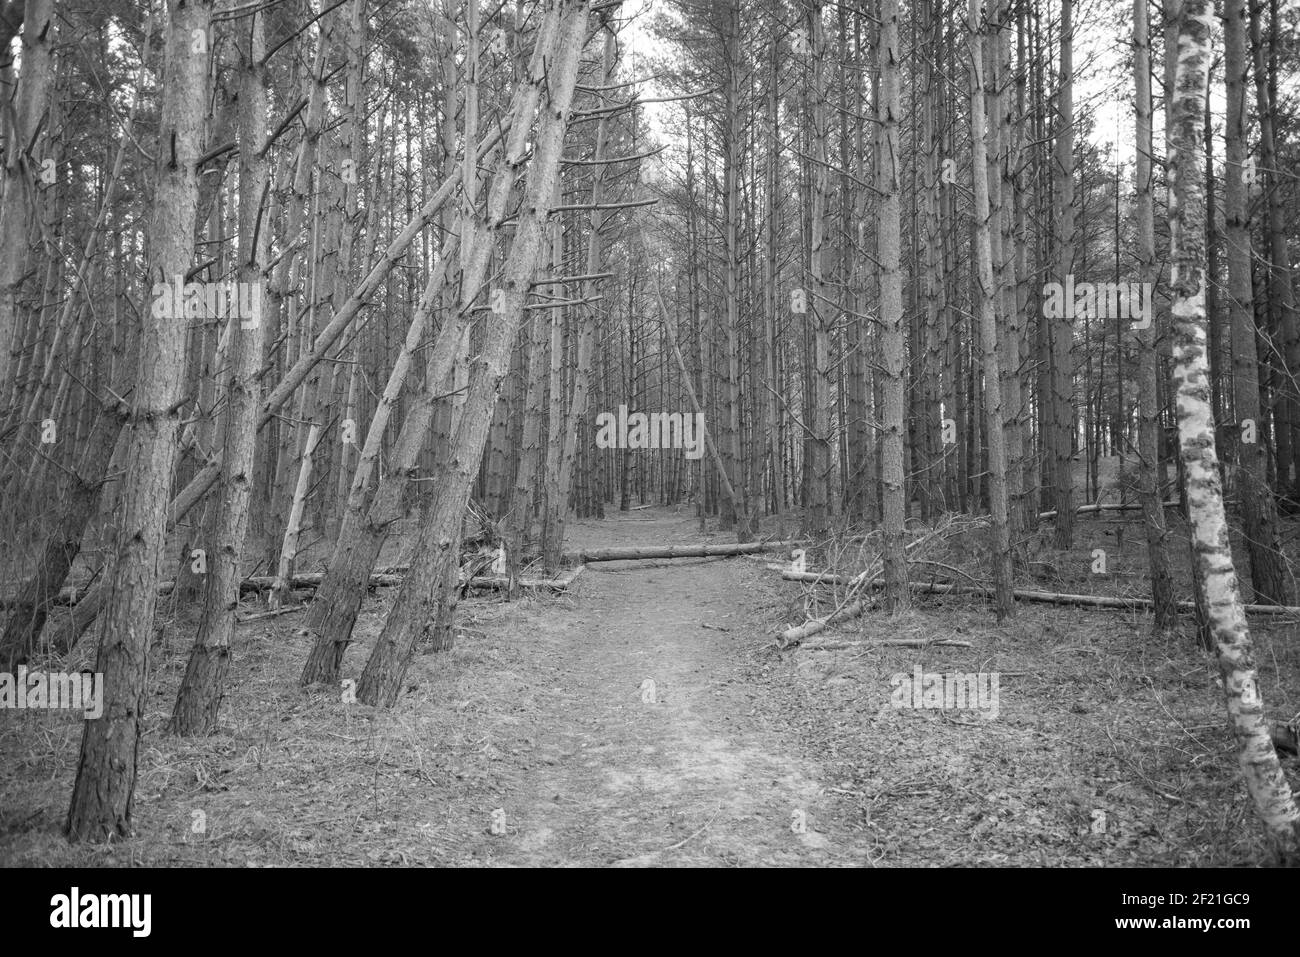 mystical pine forest that surrounds a walking trail. Some broken trees that have fallen over the walking trails. Spring sunlit trees. black and white Stock Photo